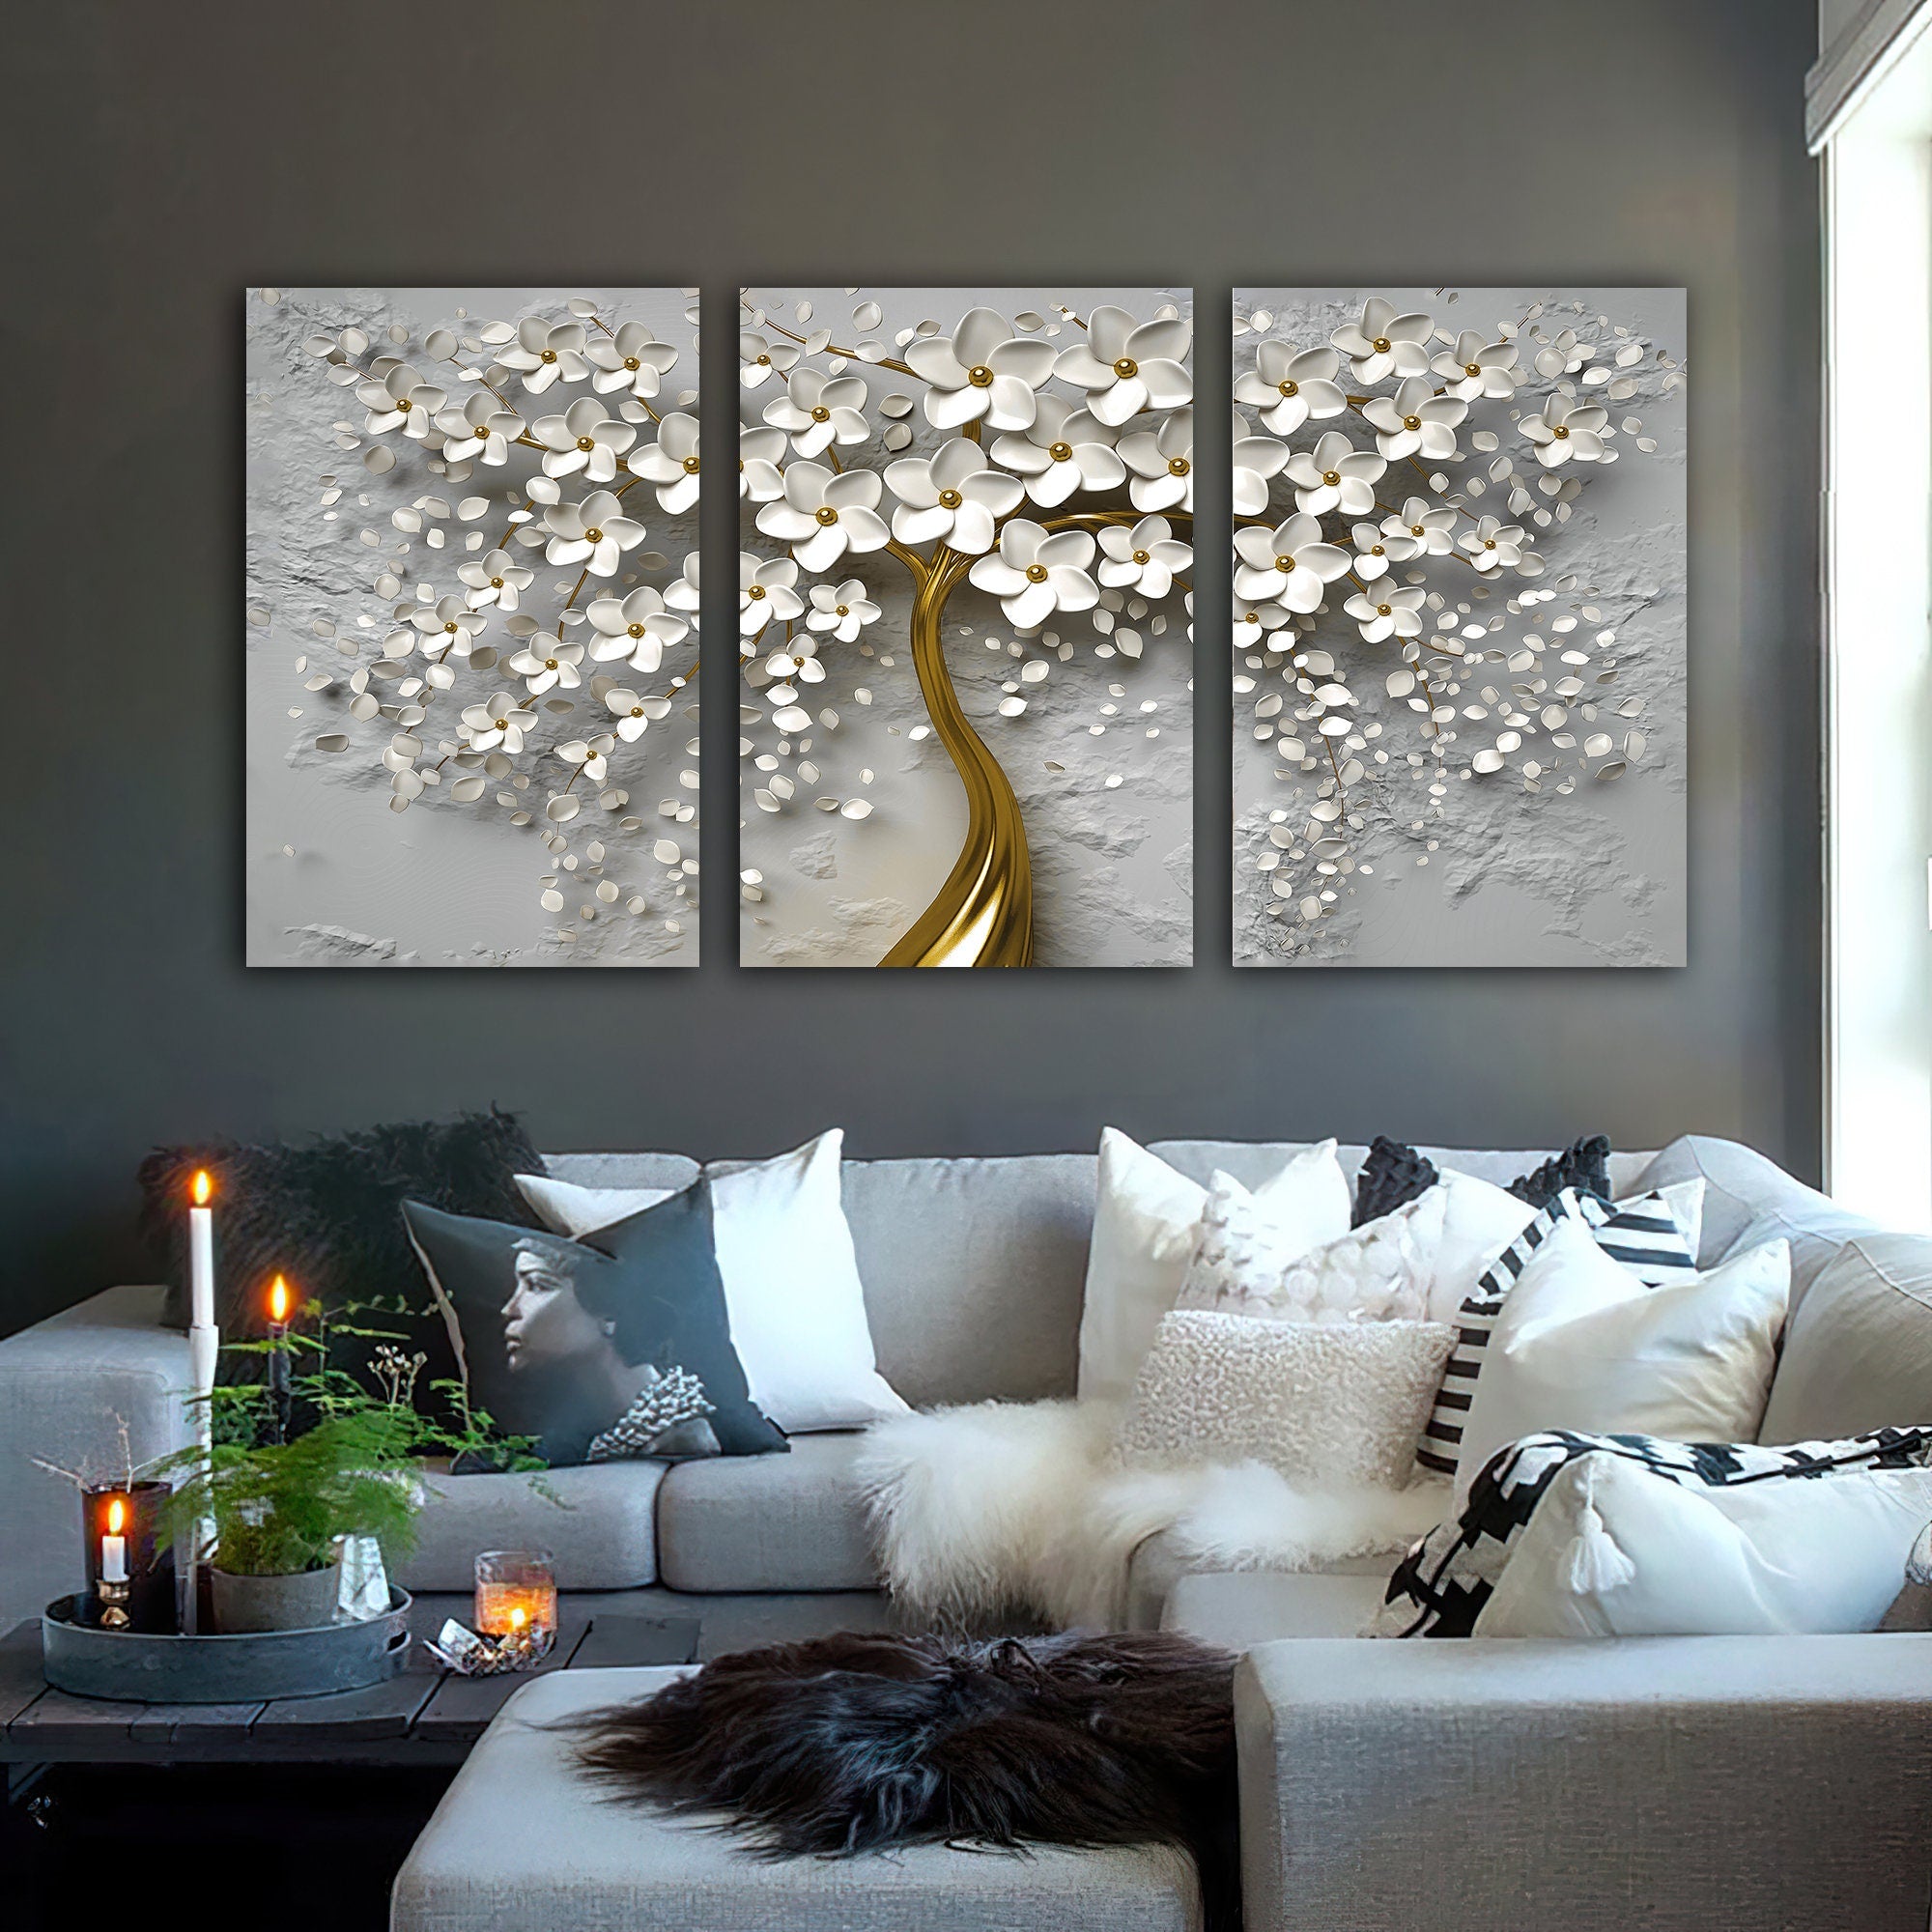 Gold and white flowers canvas painting, flowers 3 panel painting, flower 3 piece canvas painting set, floral wall decor